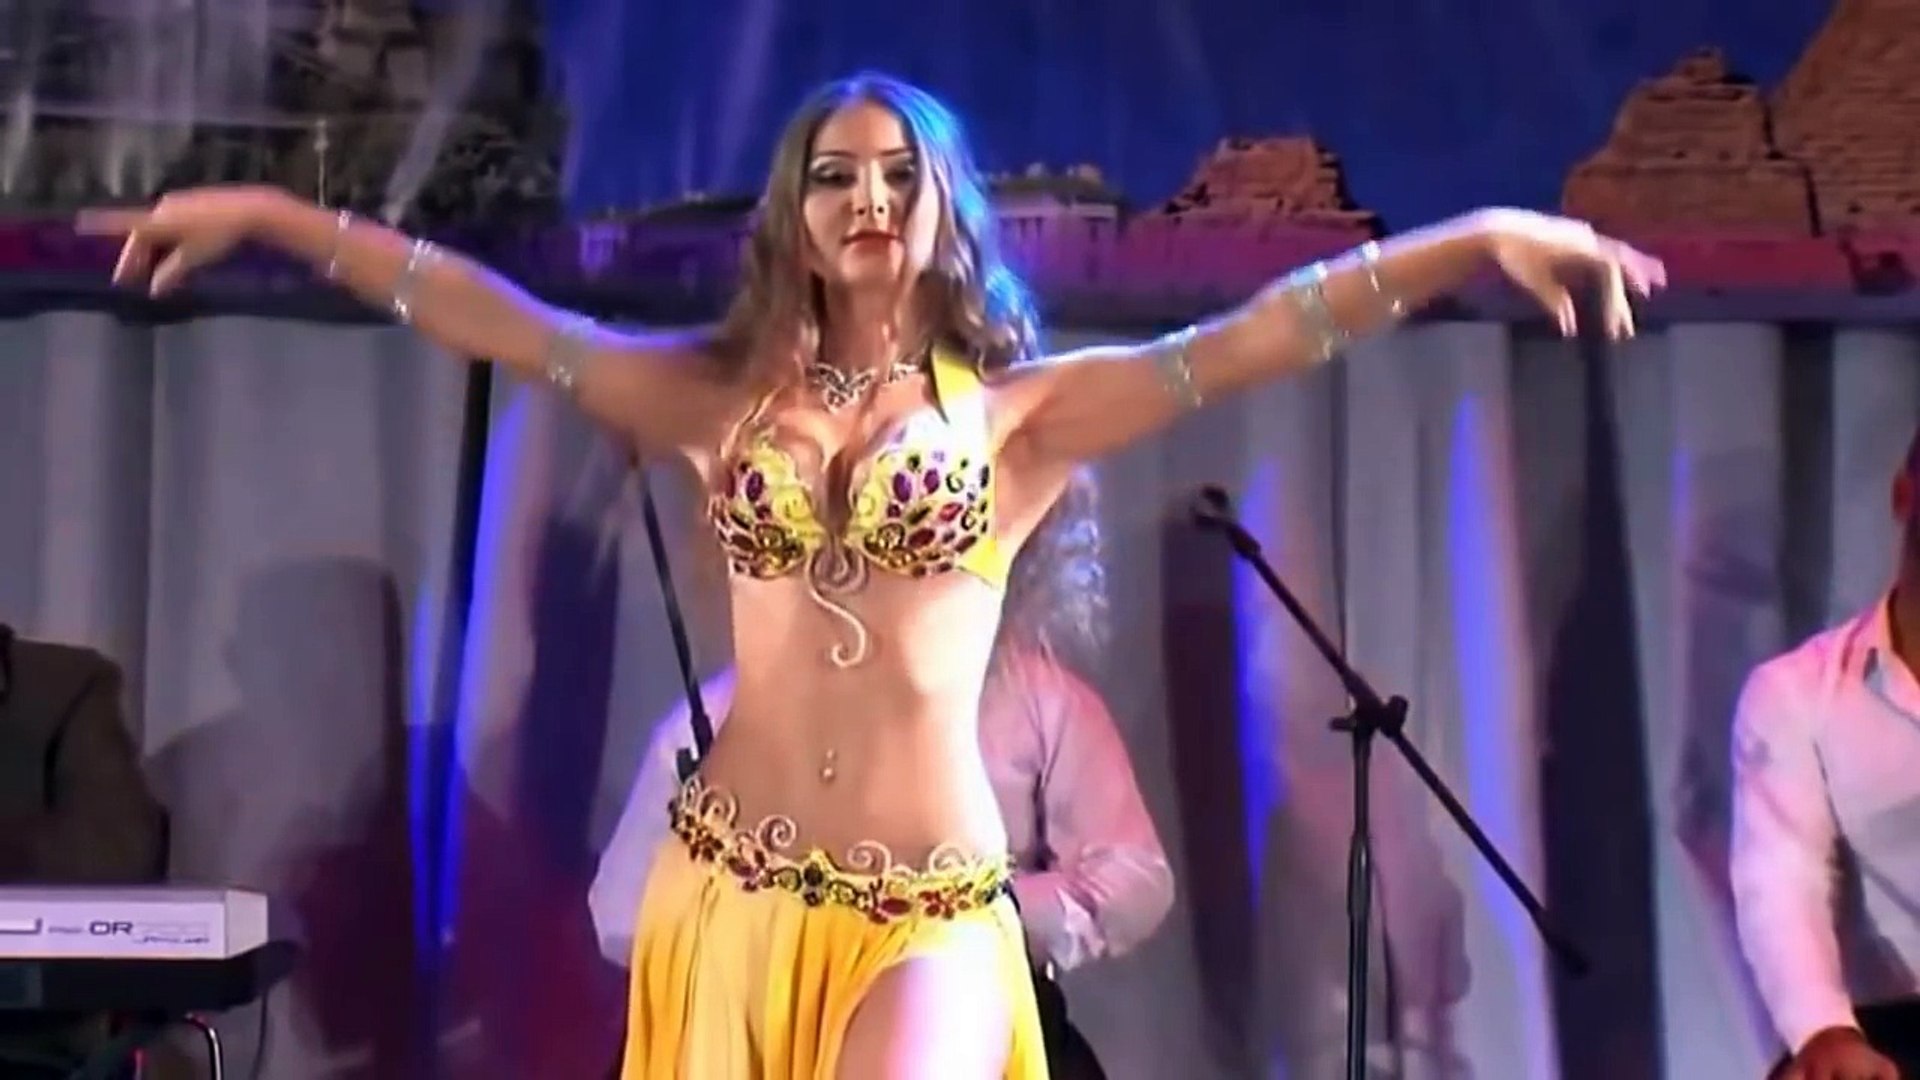 anita trott recommends Erotic Belly Dance